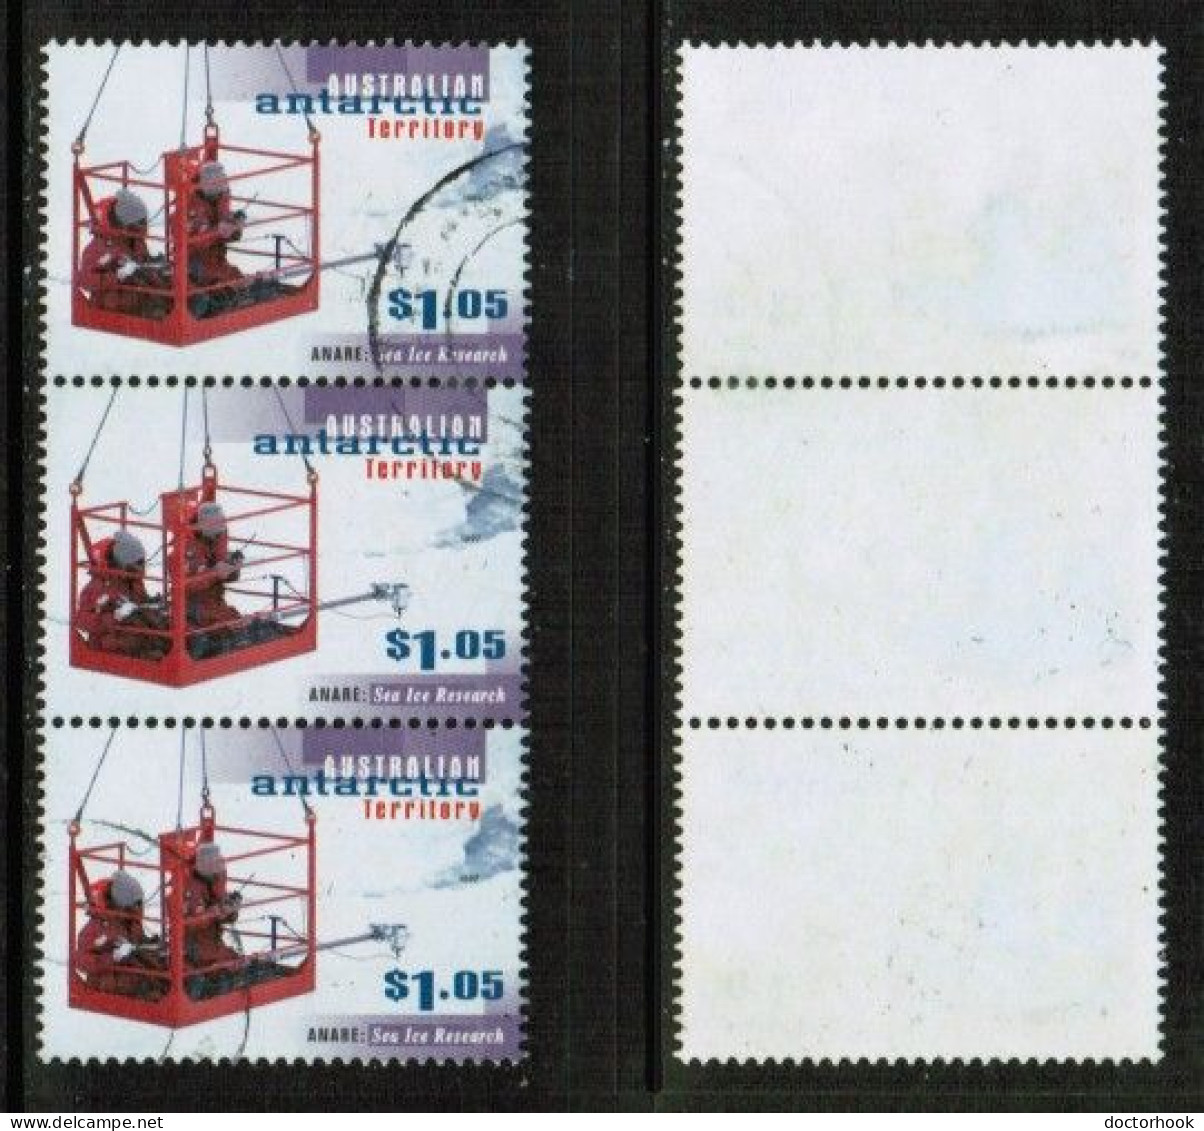 AUSTRALIAN ANTARCTIC TERRITORY   Scott # L 105 USED STRIP Of 3 (CONDITION AS PER SCAN) (Stamp Scan # 930-2) - Usados